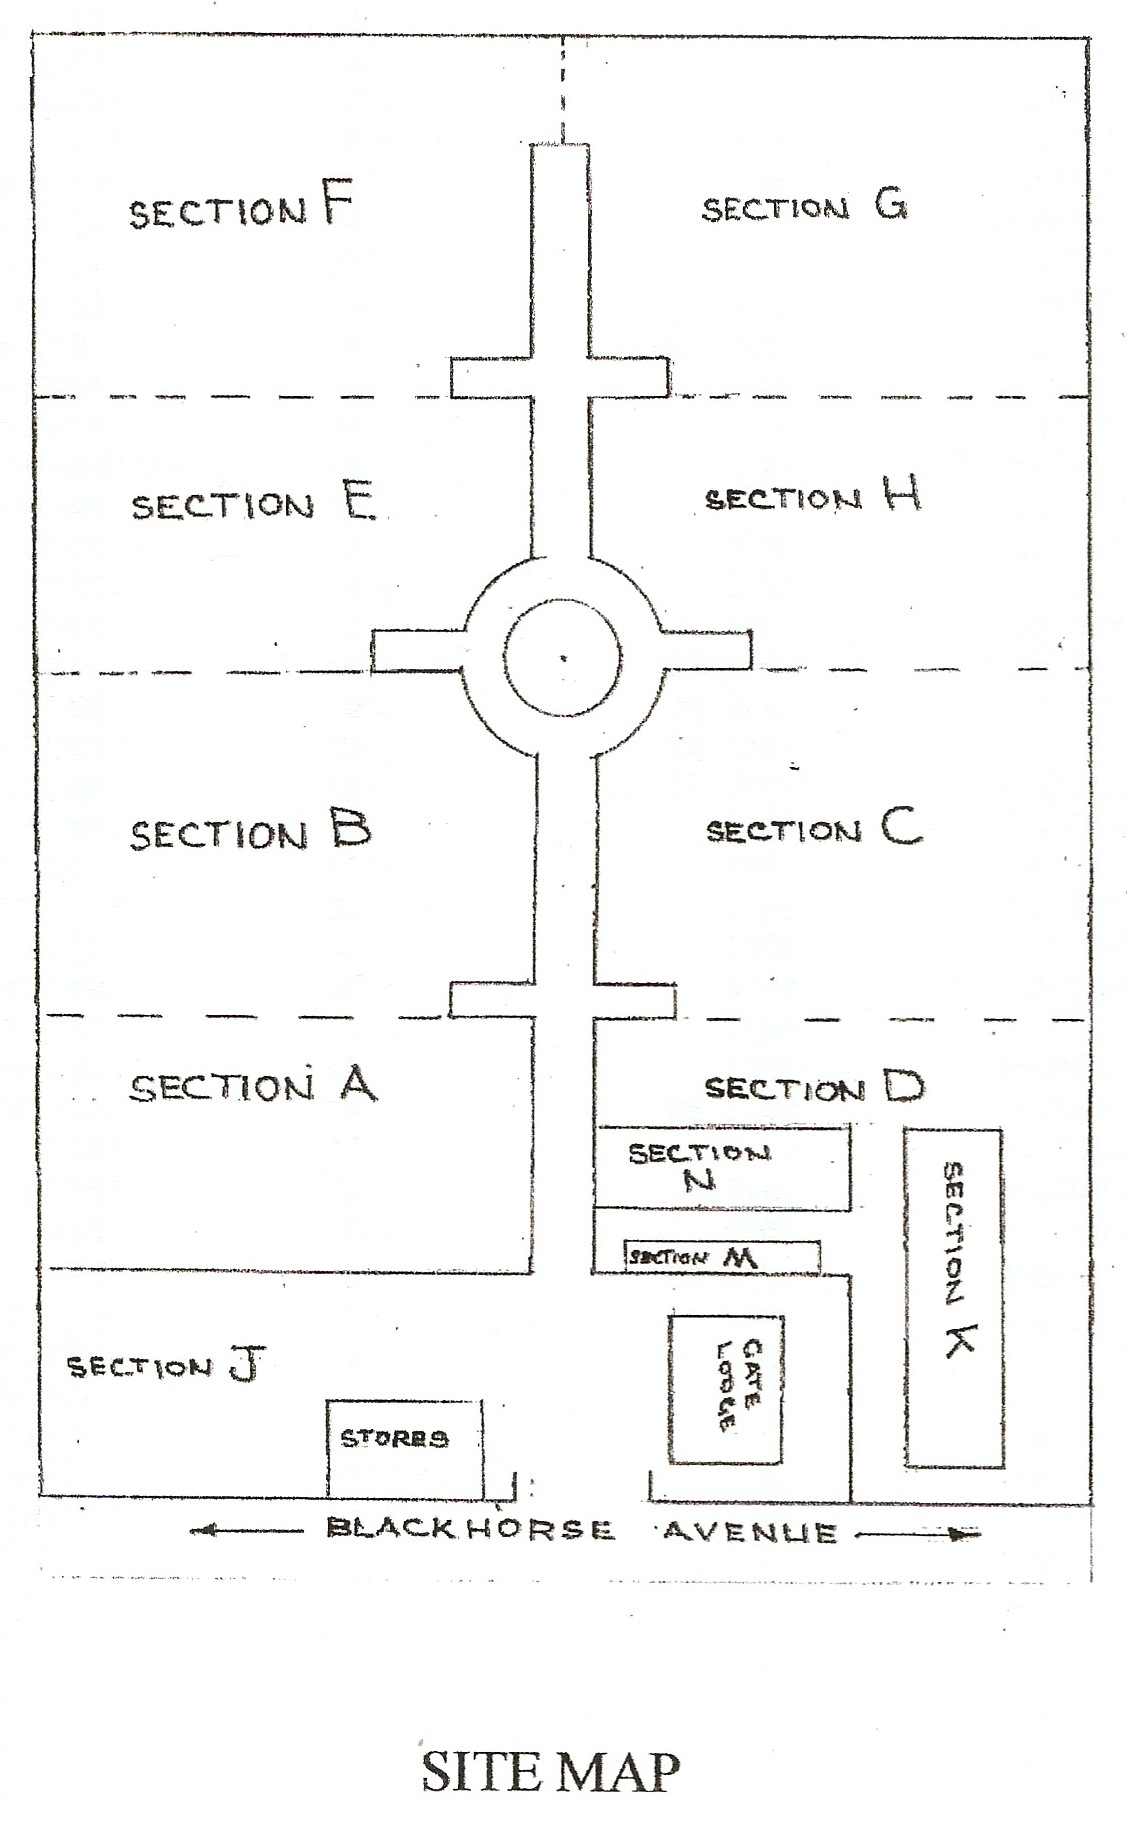 Plan for Grangegorman Cemetery, as published in 'Memorial Inscriptions of Grangegorman Military Cemetery' (2006) by the Irish Genealogical Society, and reproduced with their permission. 